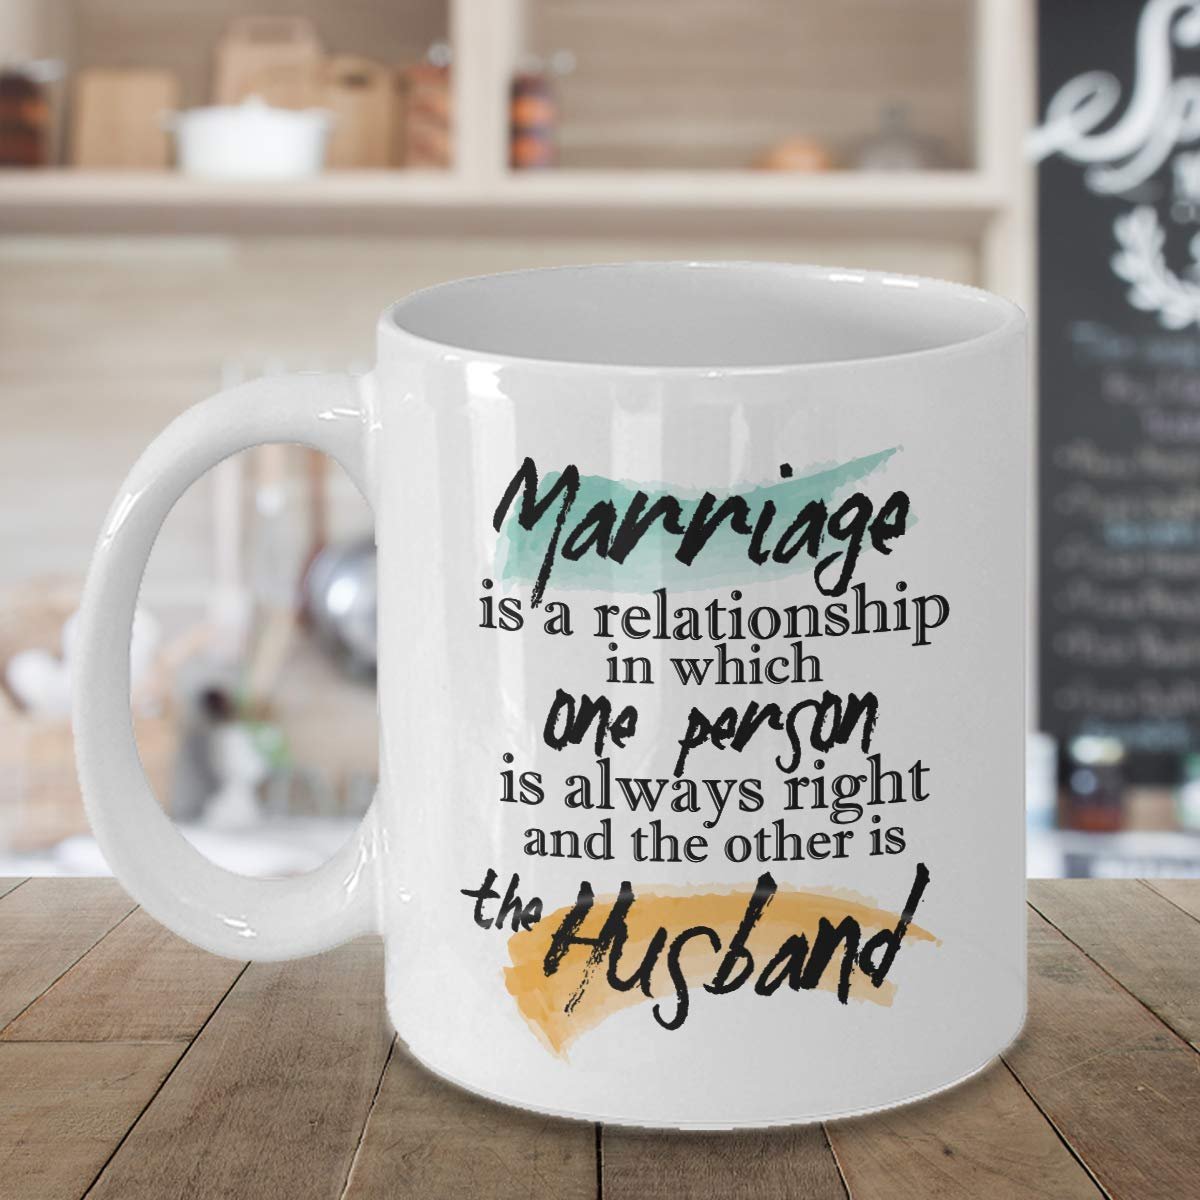 Marriage Is A Relationship In Which One Person Is Always Right Quotes Coffee & Tea Gift Mug Stuff And Funny Wedding Day, Anniversary Or Milestone Gifts For A Couple, Wife, Husband, Bride & Groom - image 2 of 4